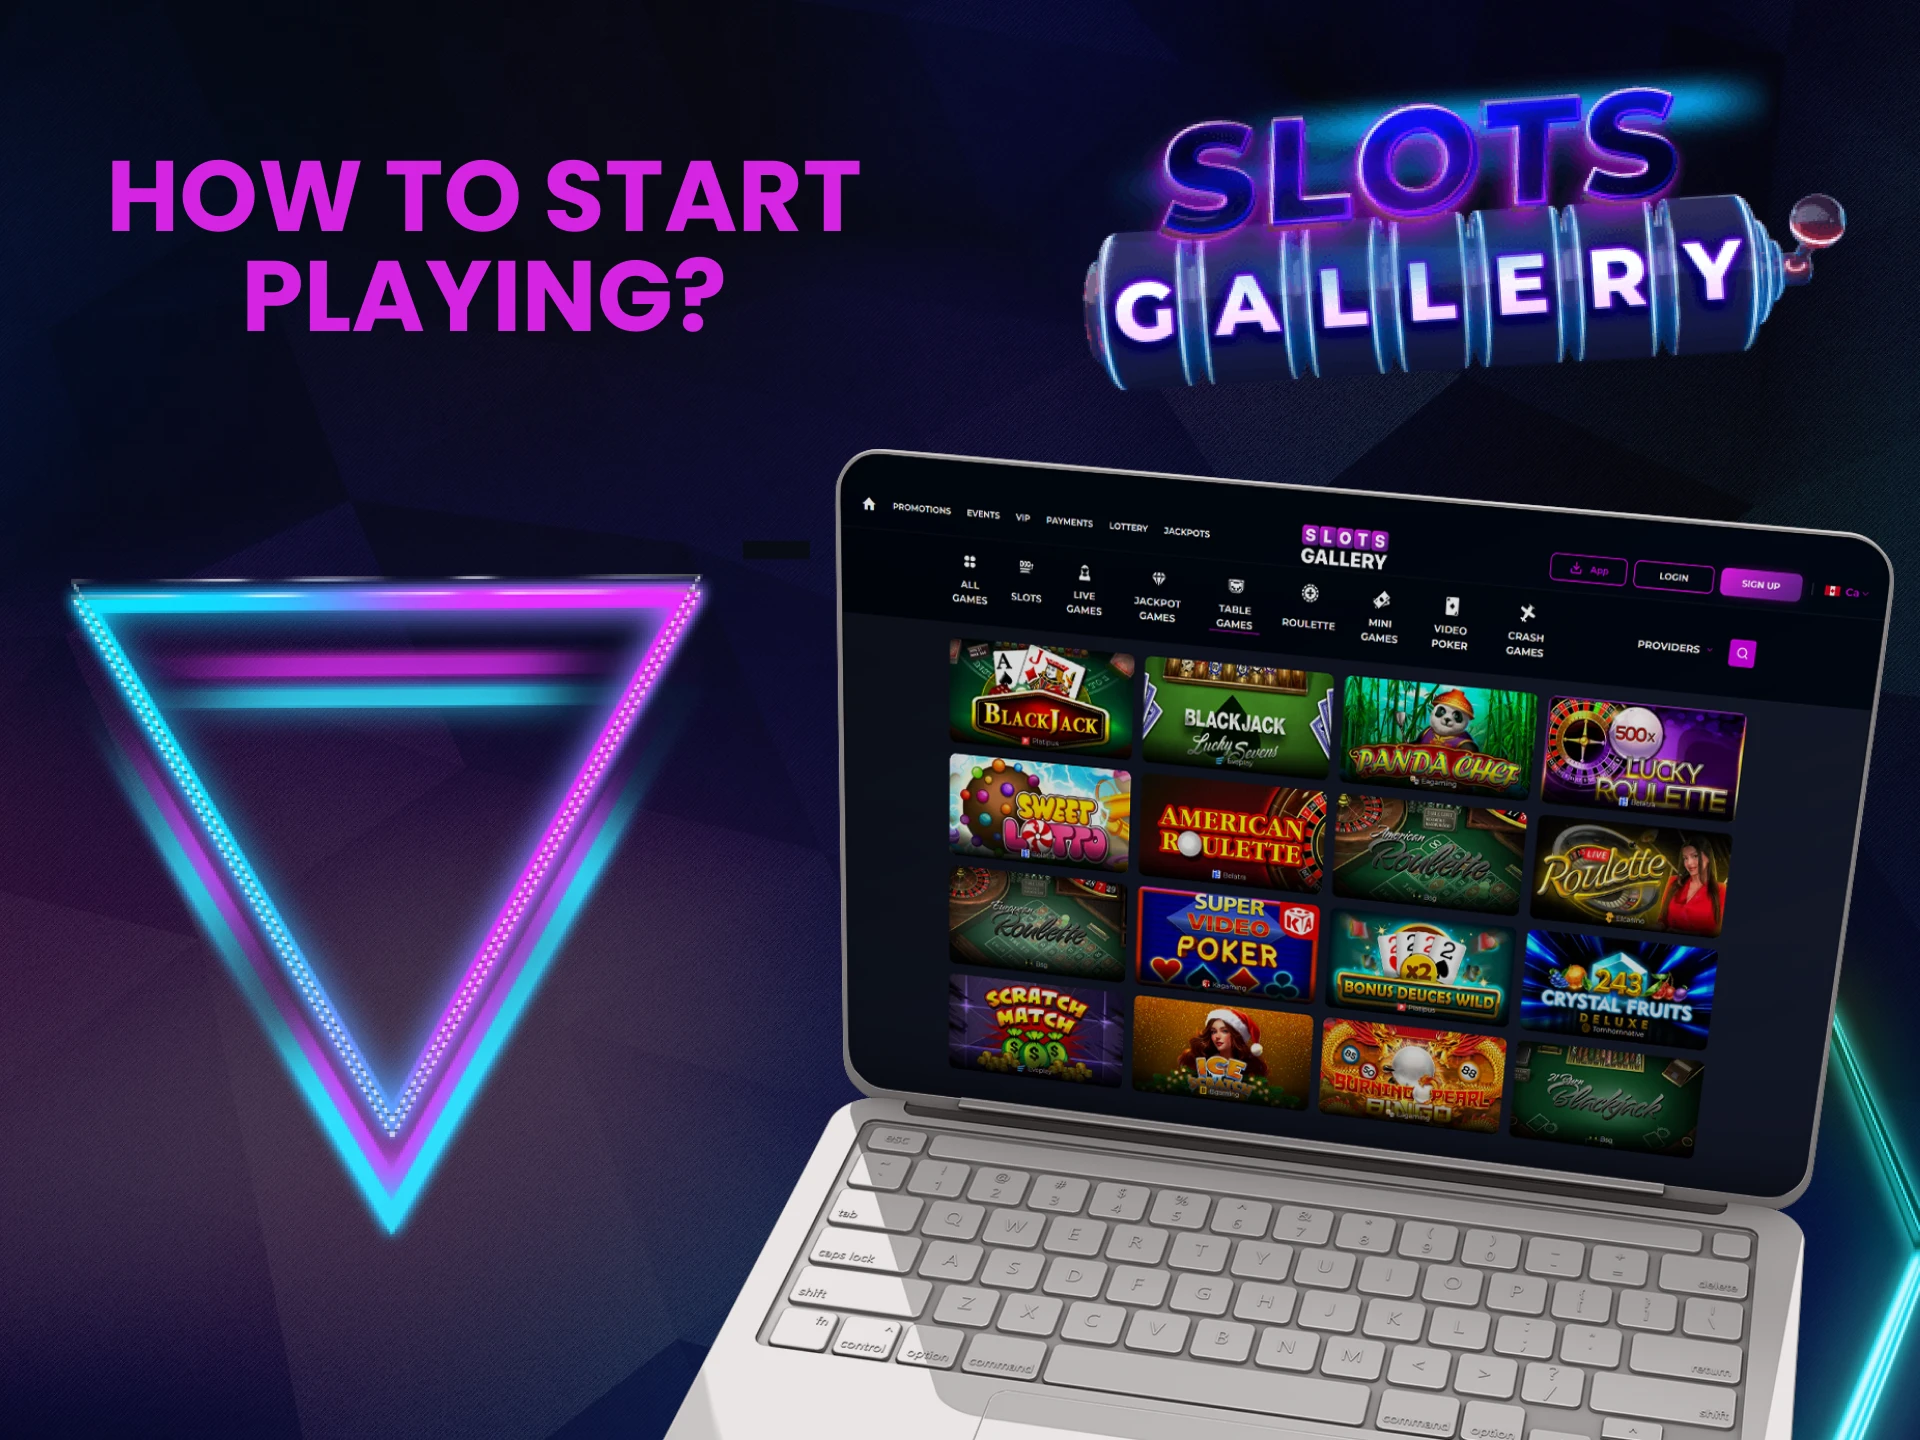 Select the casino table games section at Slots Gallery.